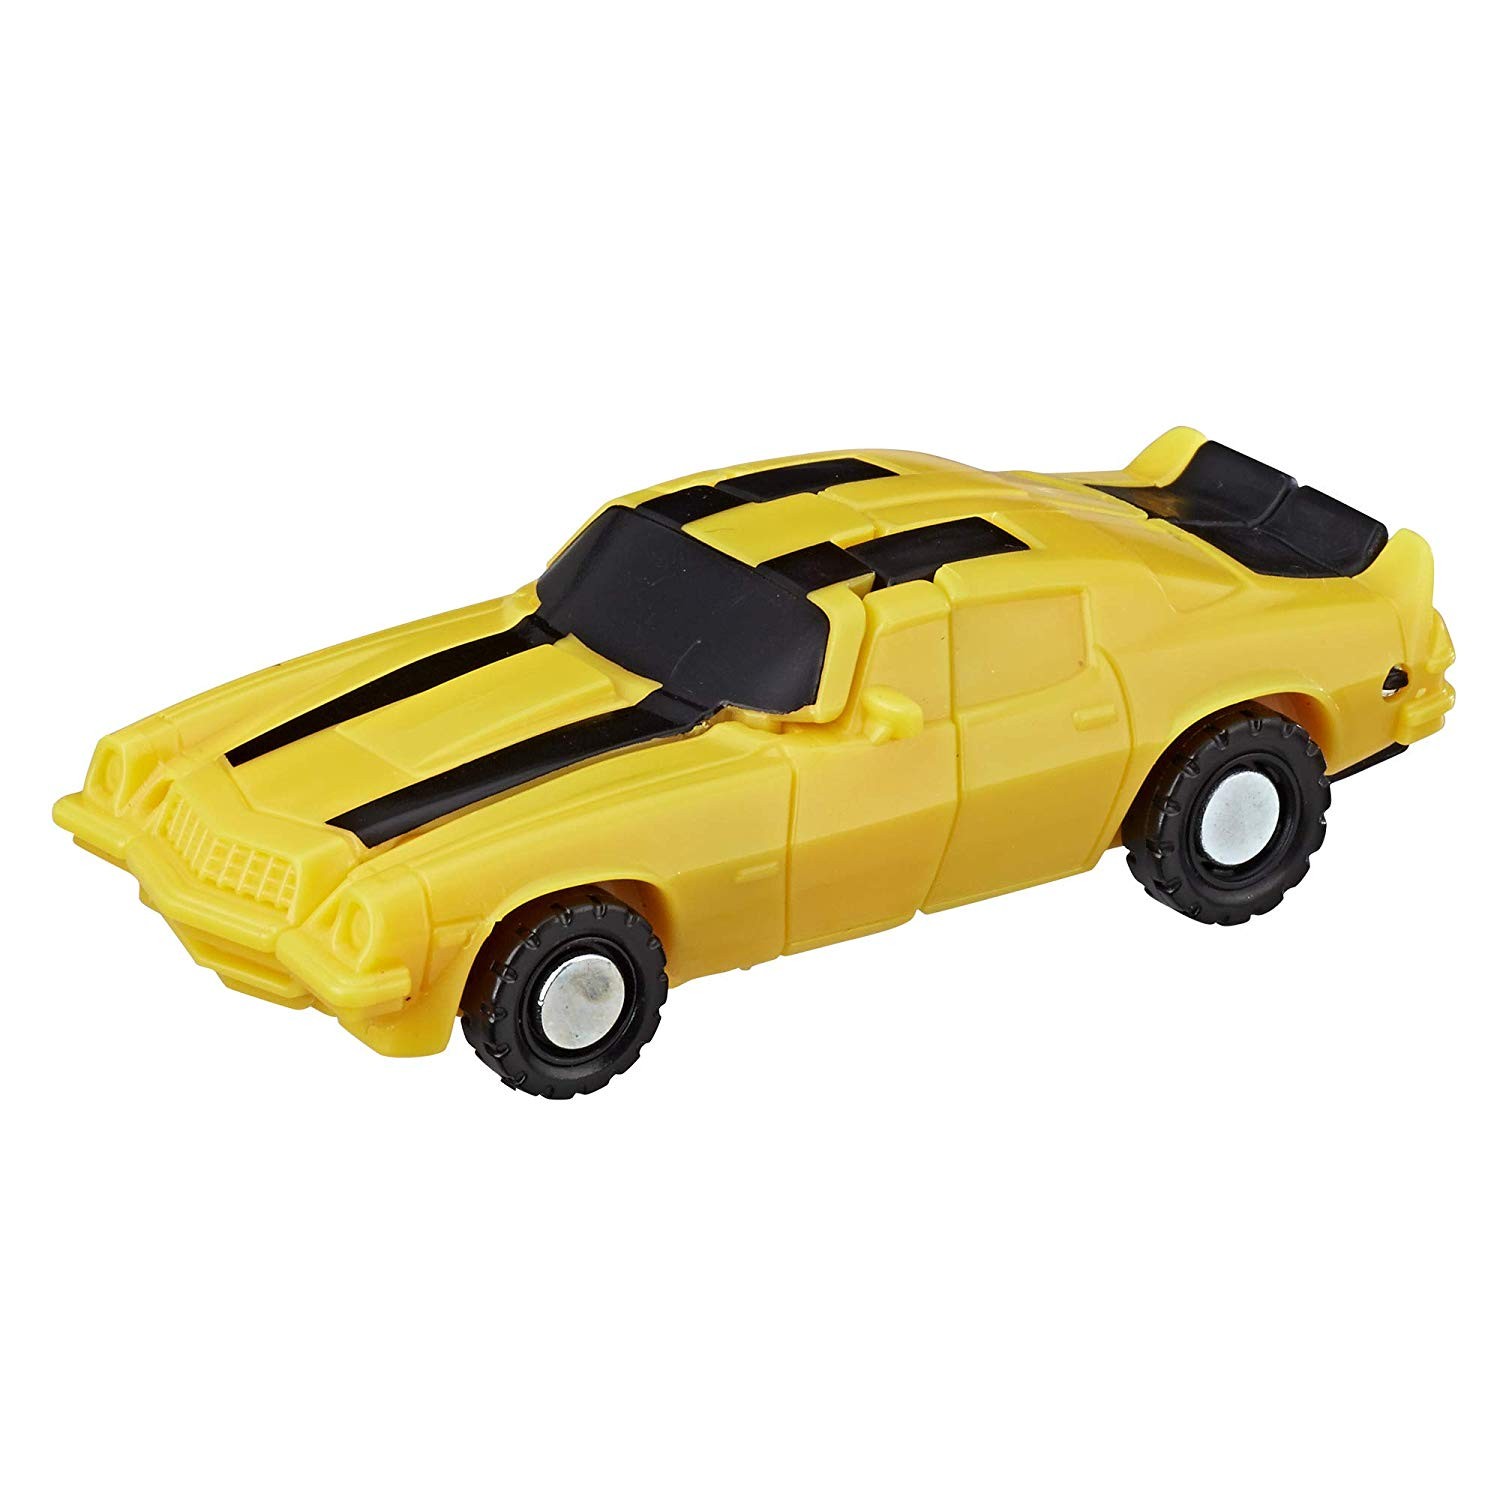 Transformers News: More Stock Images of Transformers Bumblebee Movie Masks, Stinger, Speed Series Camaro Bumblebee